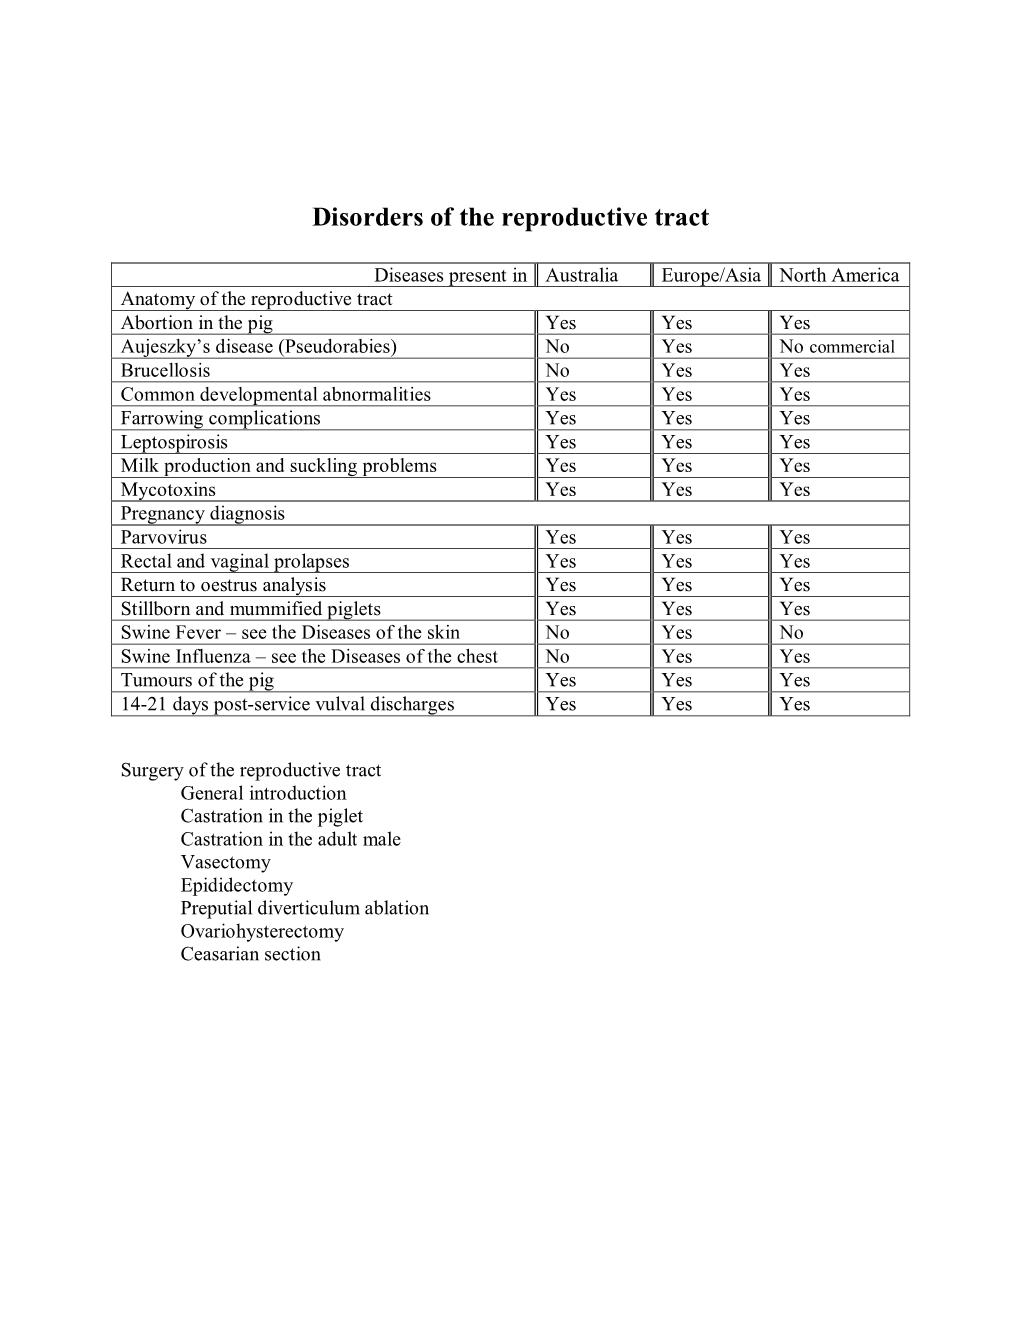 Disorders of the Reproductive Tract